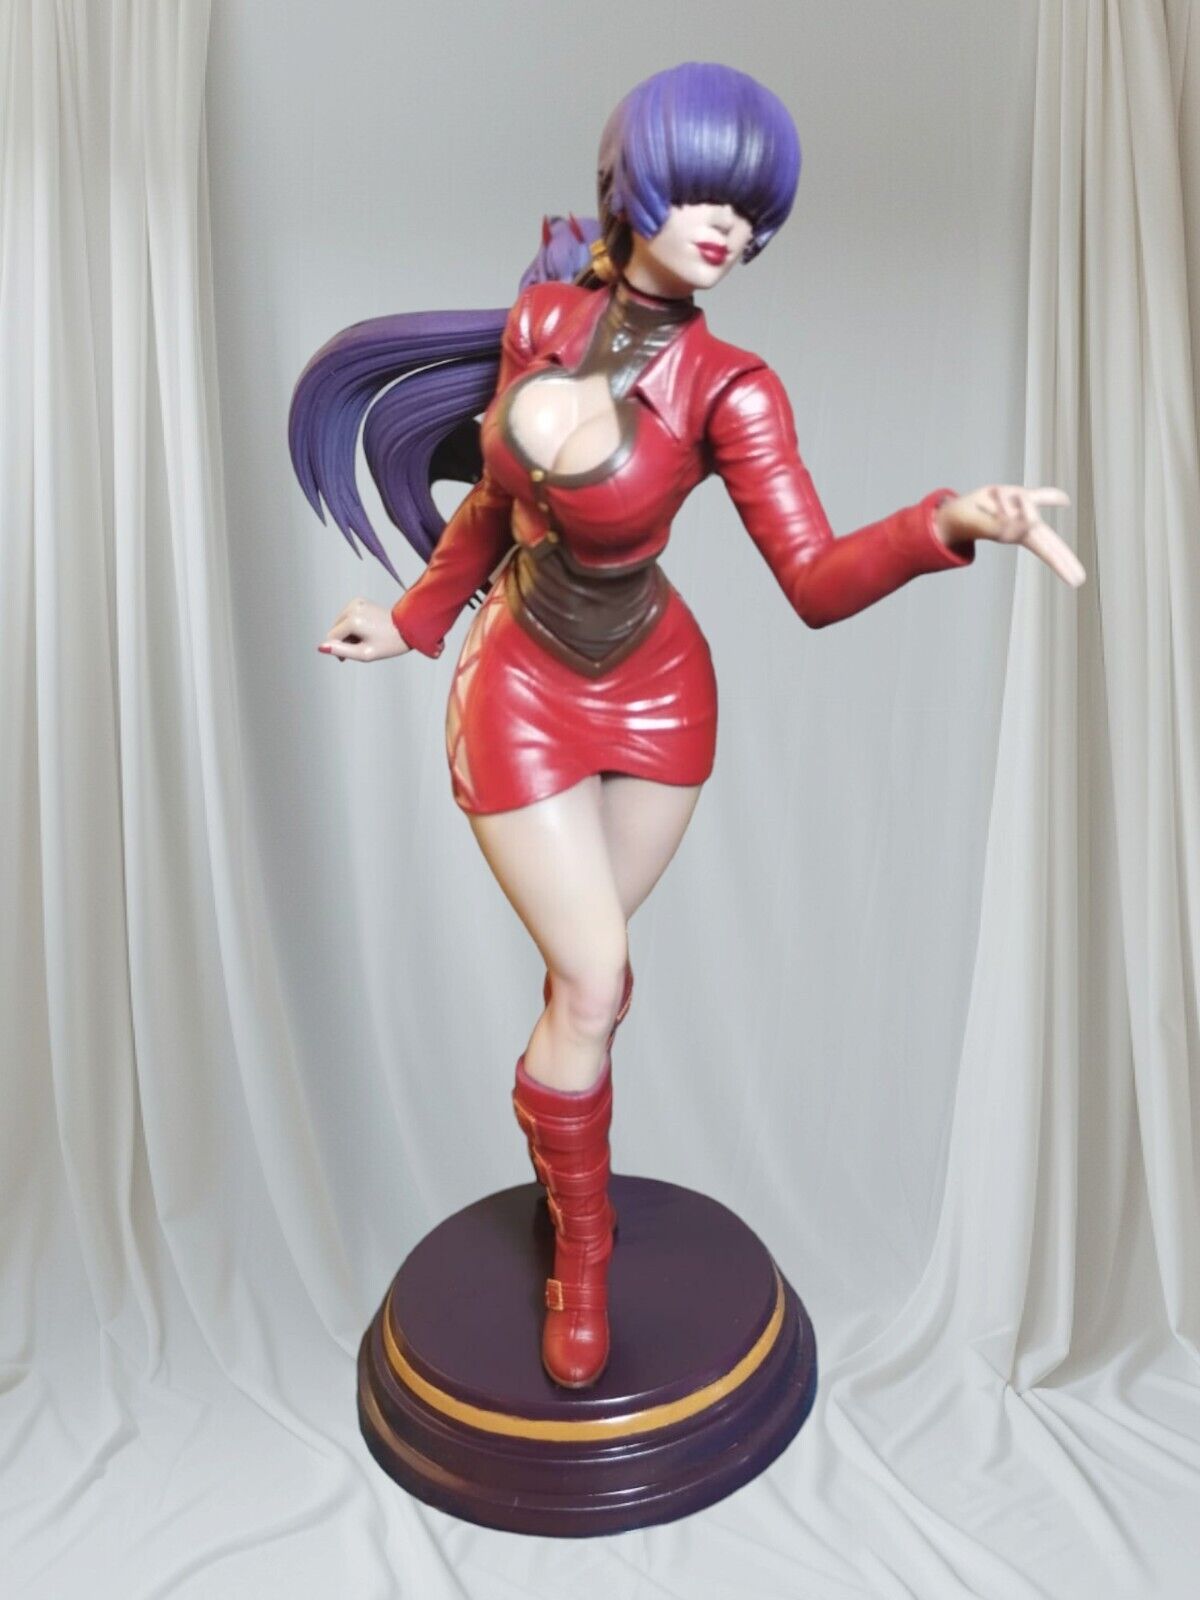 Figura Shermie KOF completely handpainted 25 cm or 9.84 inch